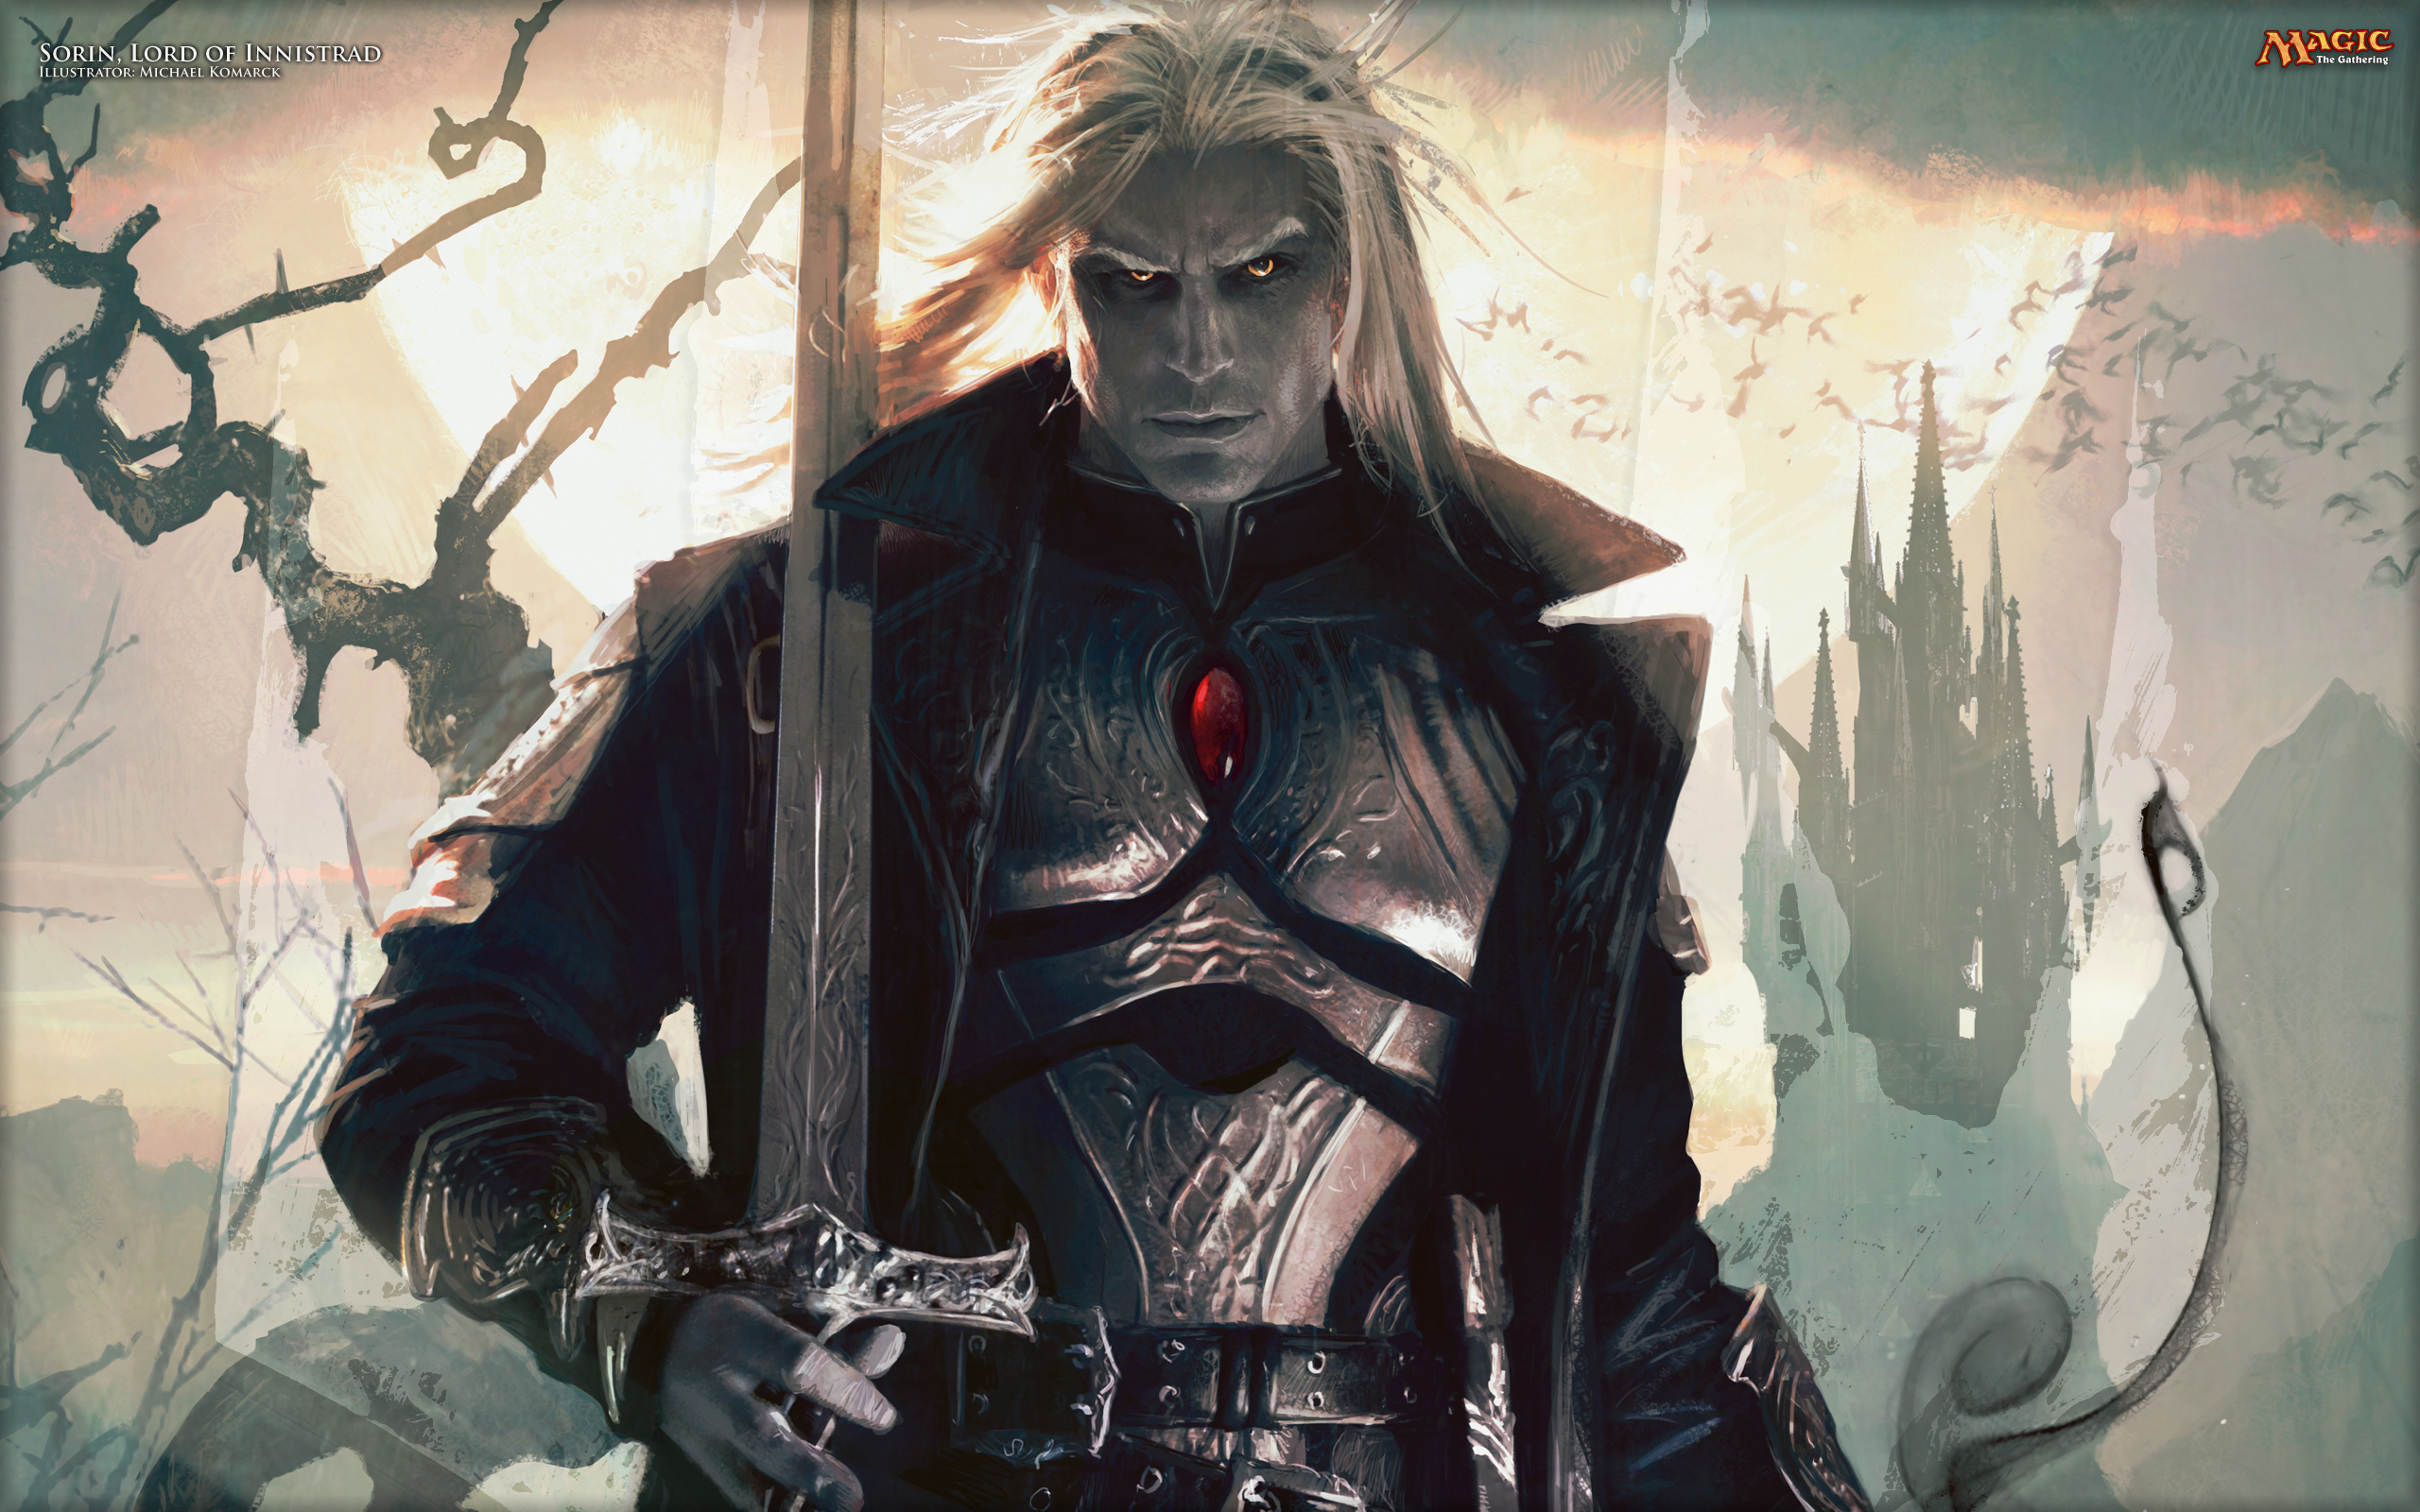 Wallpaper Of The Week Sorin Lord Of Innistrad Magic The Gathering